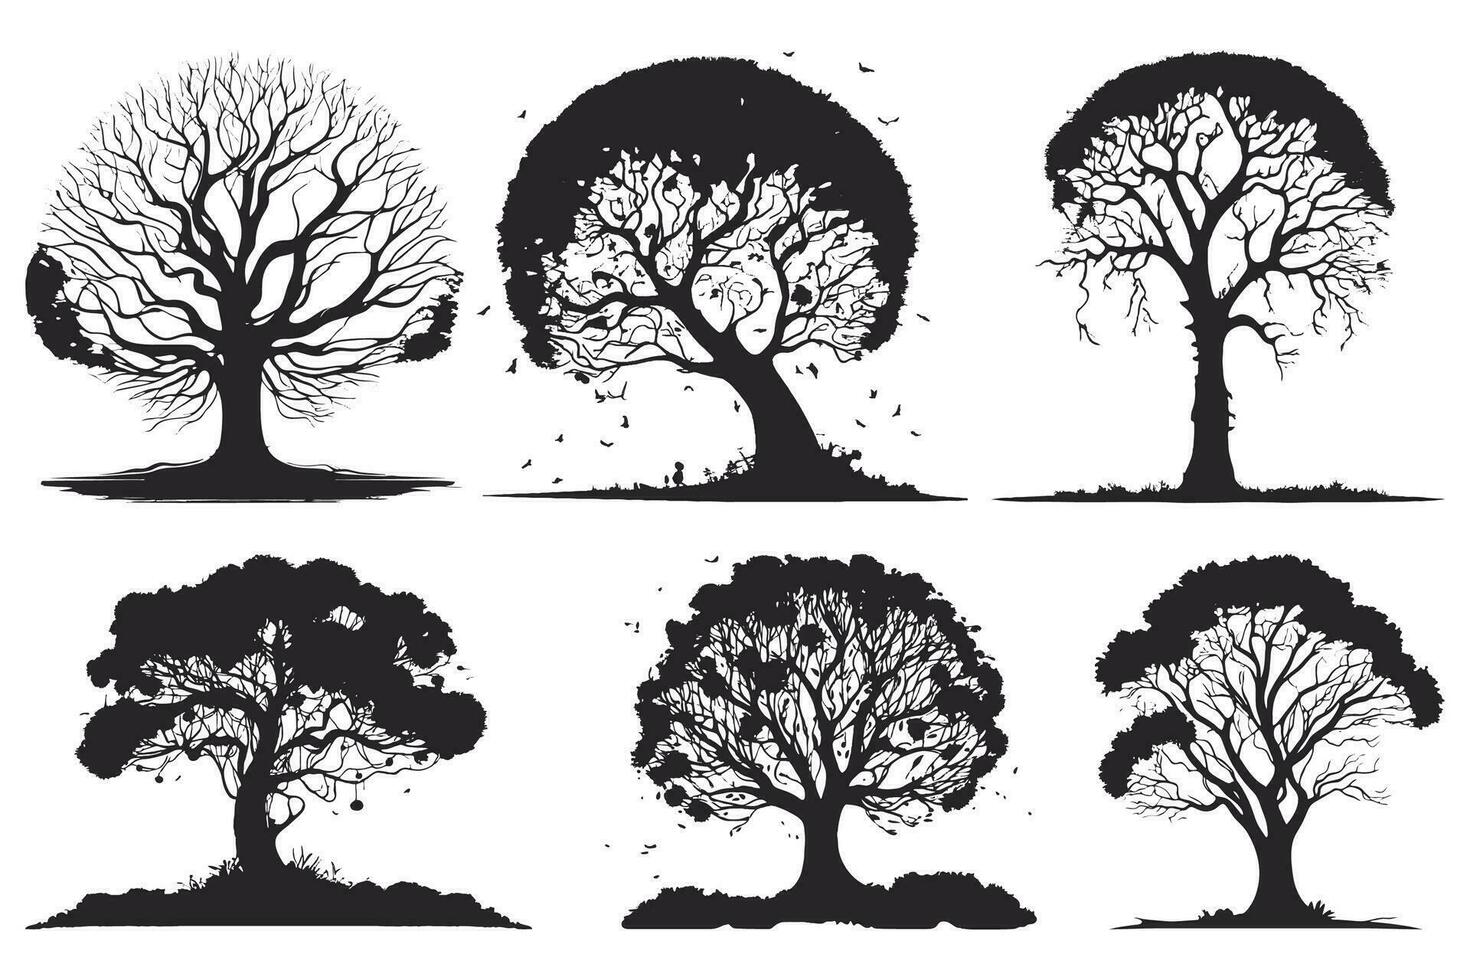 collection of big tree silhouettes in summer on isolated white background vector